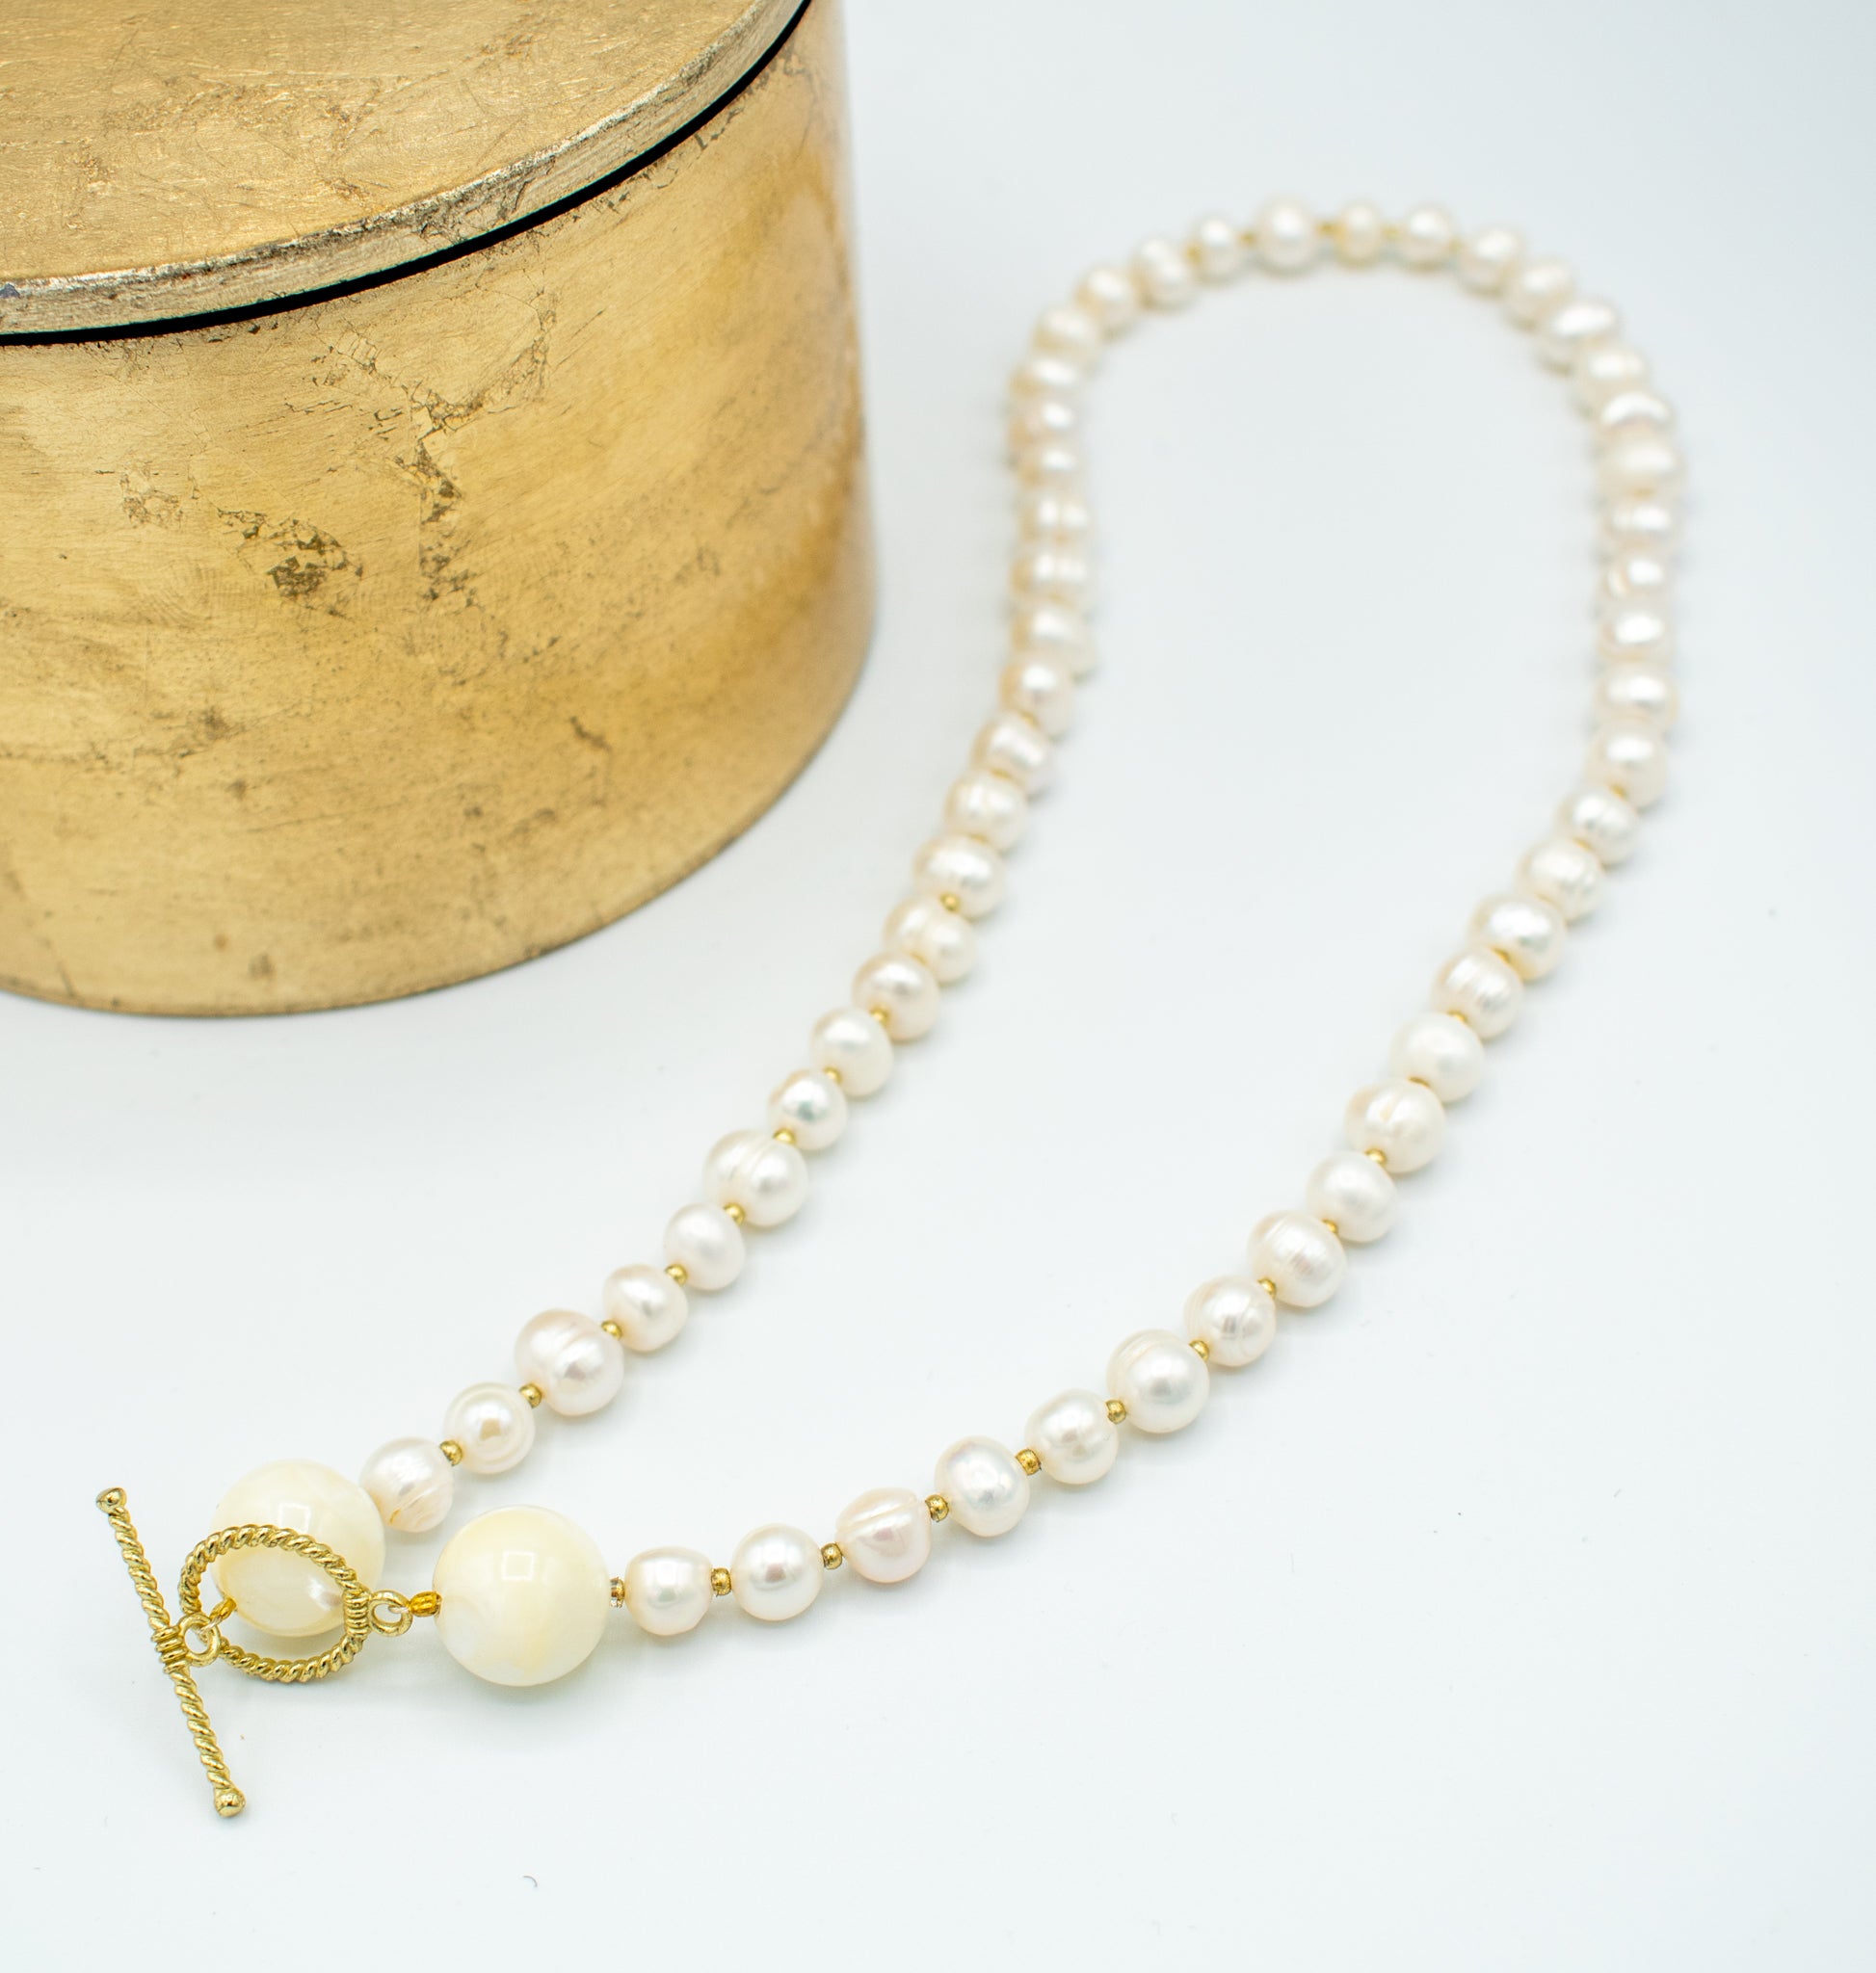 7mm Freshwater Pearl Bracelet with Silver Clasp - Pearl & Clasp